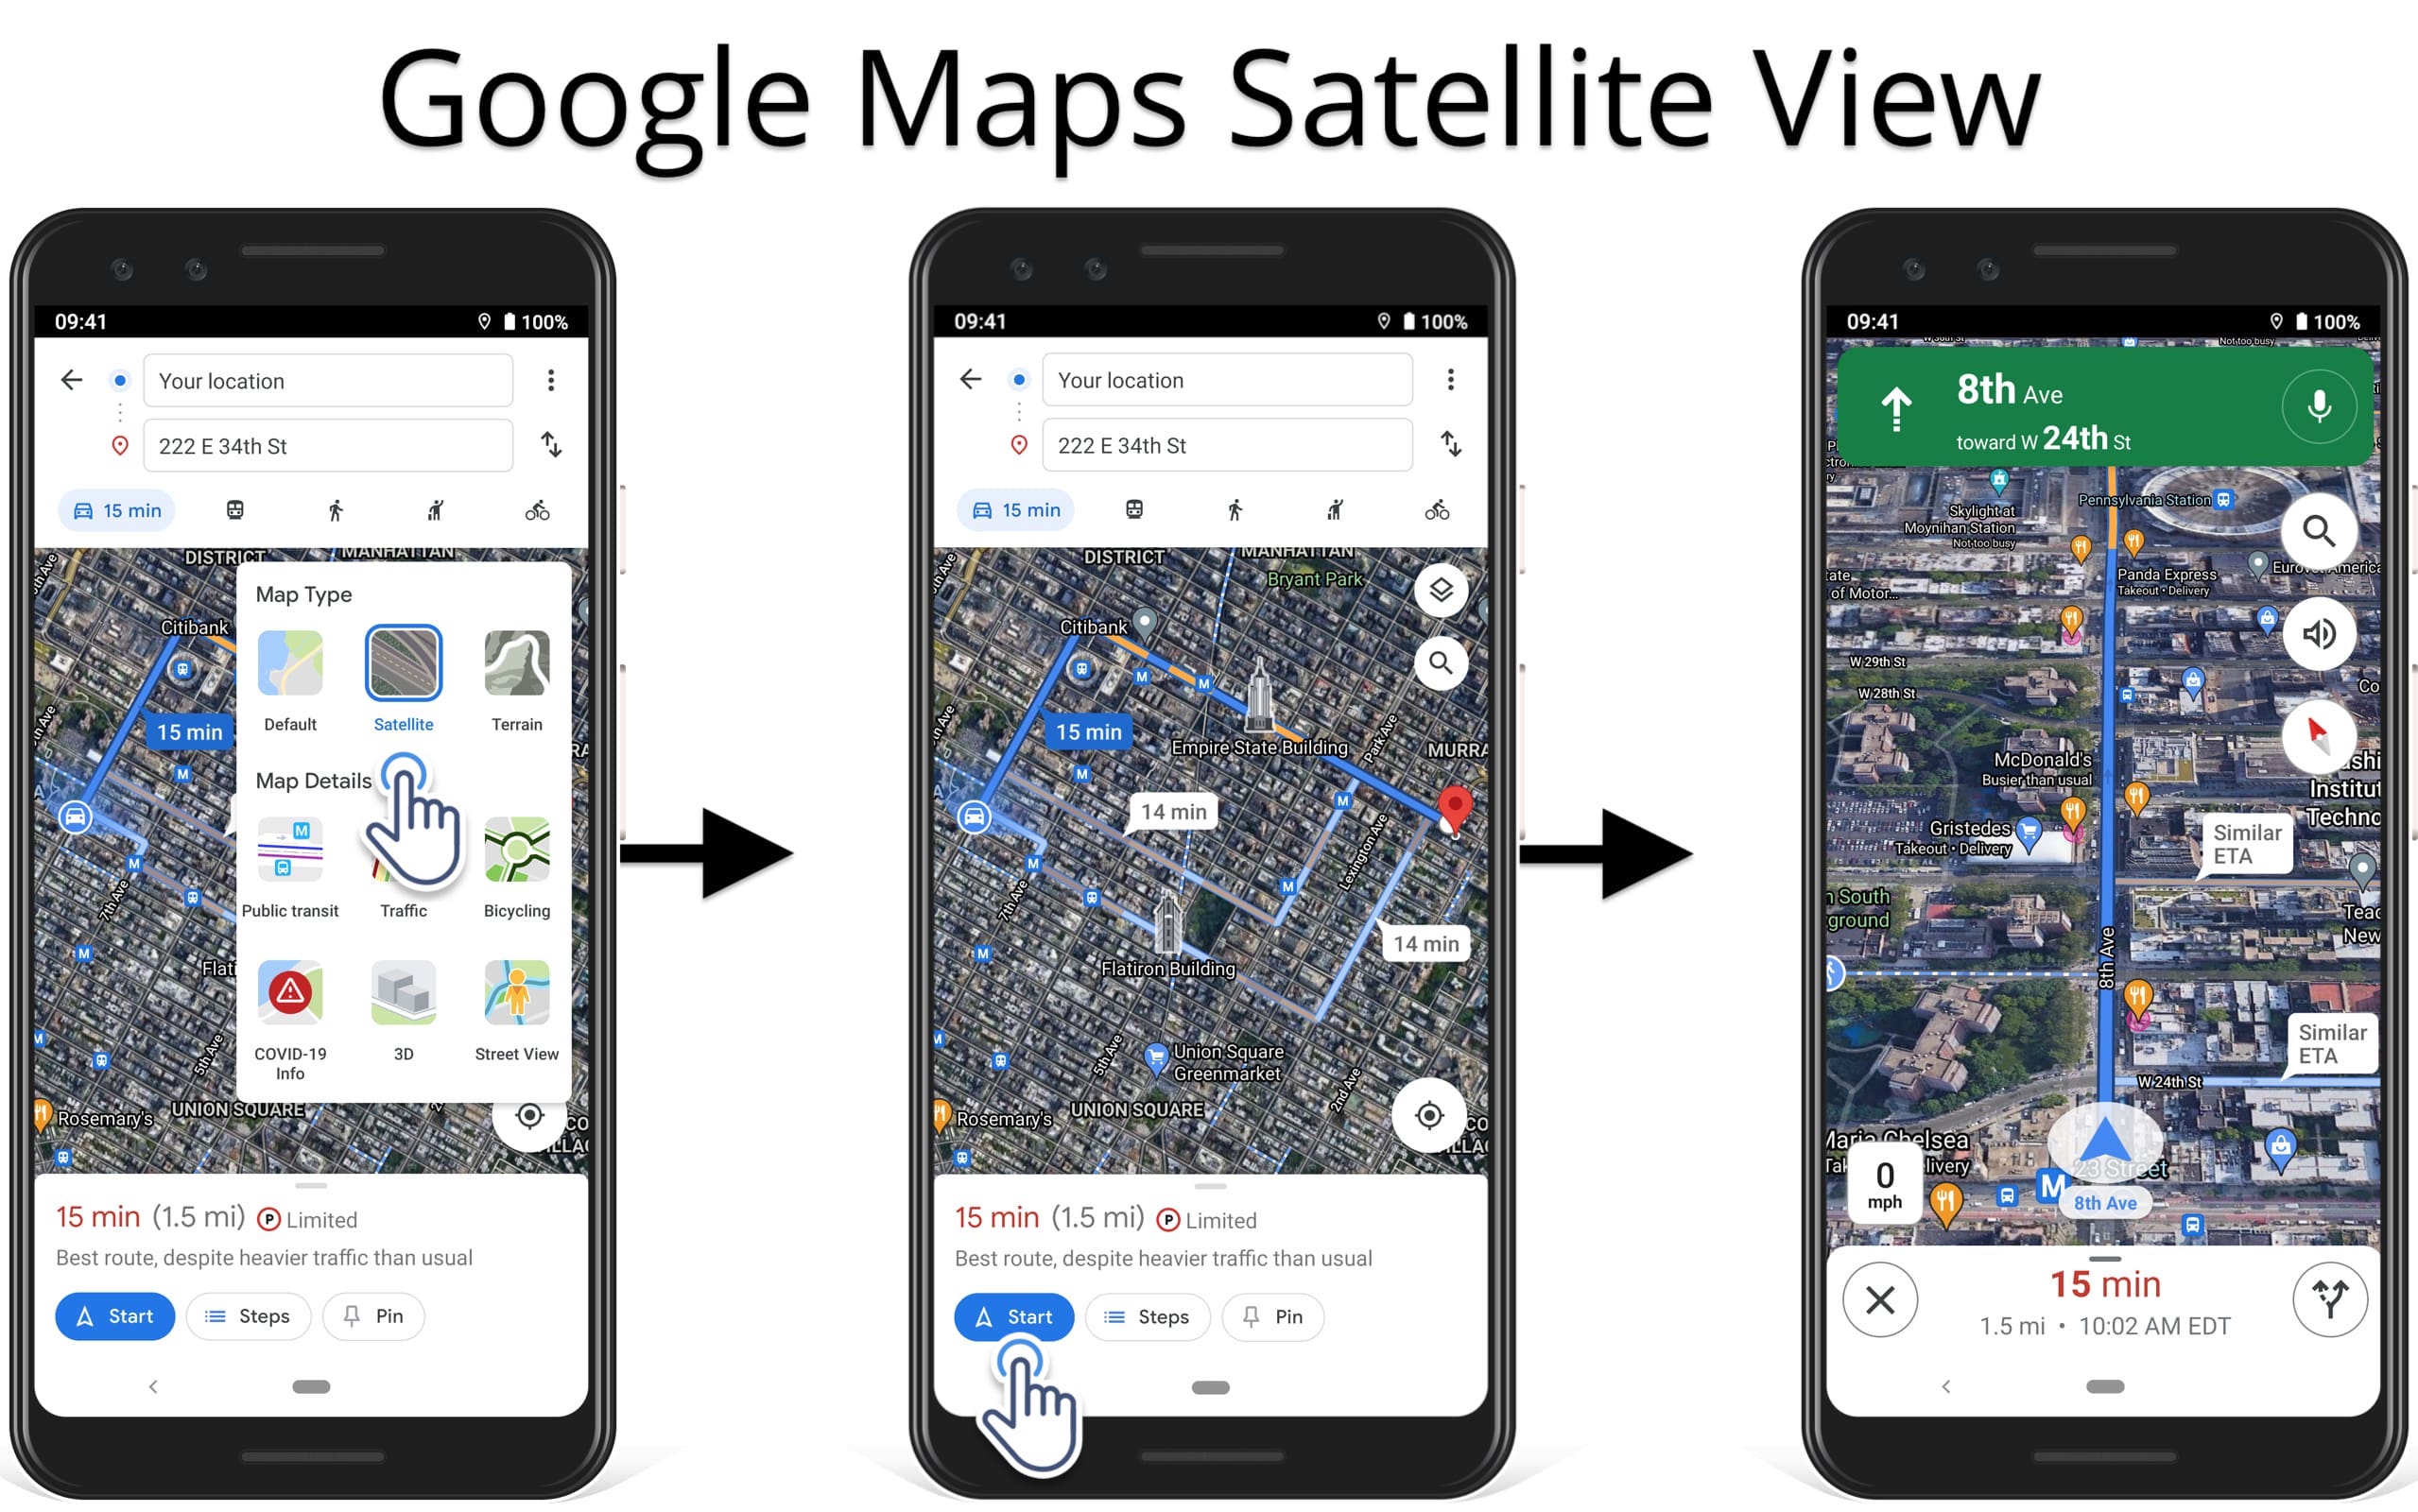 Open and navigate the planned route in Google Maps satellite view.